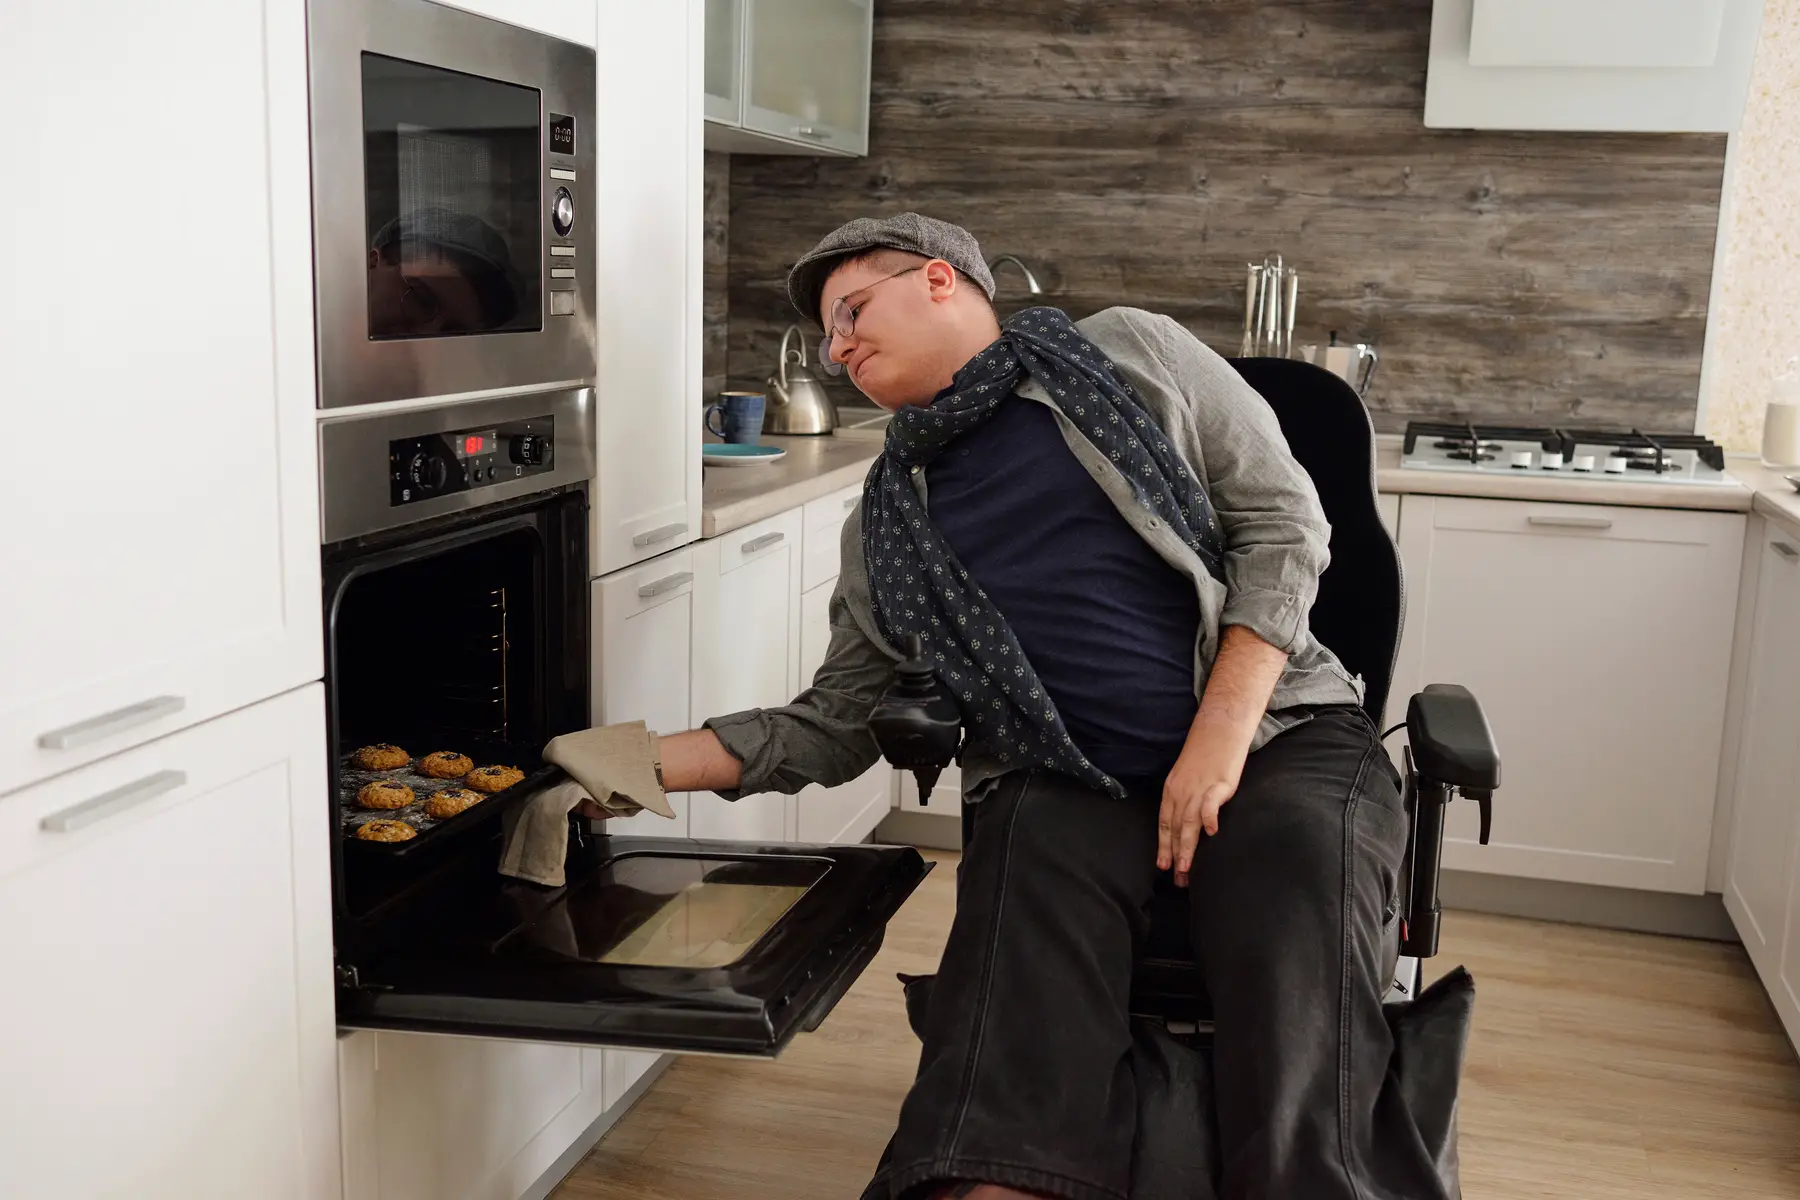 Accessible home: man in wheelchair baking muffins